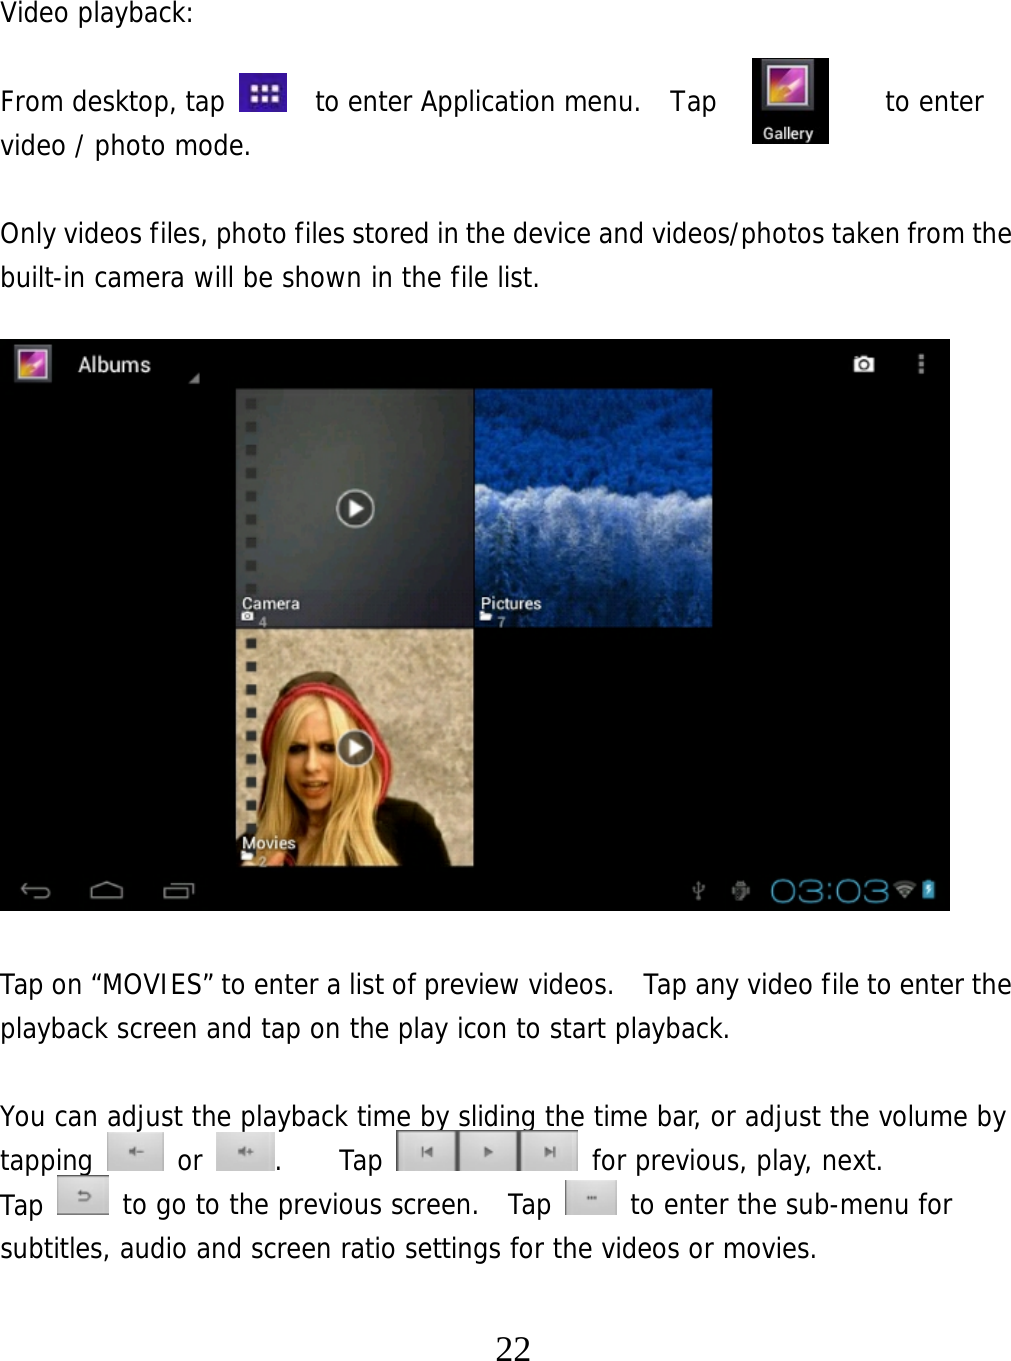   22 Video playback:  From desktop, tap    to enter Application menu.  Tap       to enter video / photo mode.  Only videos files, photo files stored in the device and videos/photos taken from the built-in camera will be shown in the file list.                   Tap on “MOVIES” to enter a list of preview videos.   Tap any video file to enter the playback screen and tap on the play icon to start playback.   You can adjust the playback time by sliding the time bar, or adjust the volume by tapping   or  .    Tap   for previous, play, next. Tap   to go to the previous screen.  Tap   to enter the sub-menu for subtitles, audio and screen ratio settings for the videos or movies. 